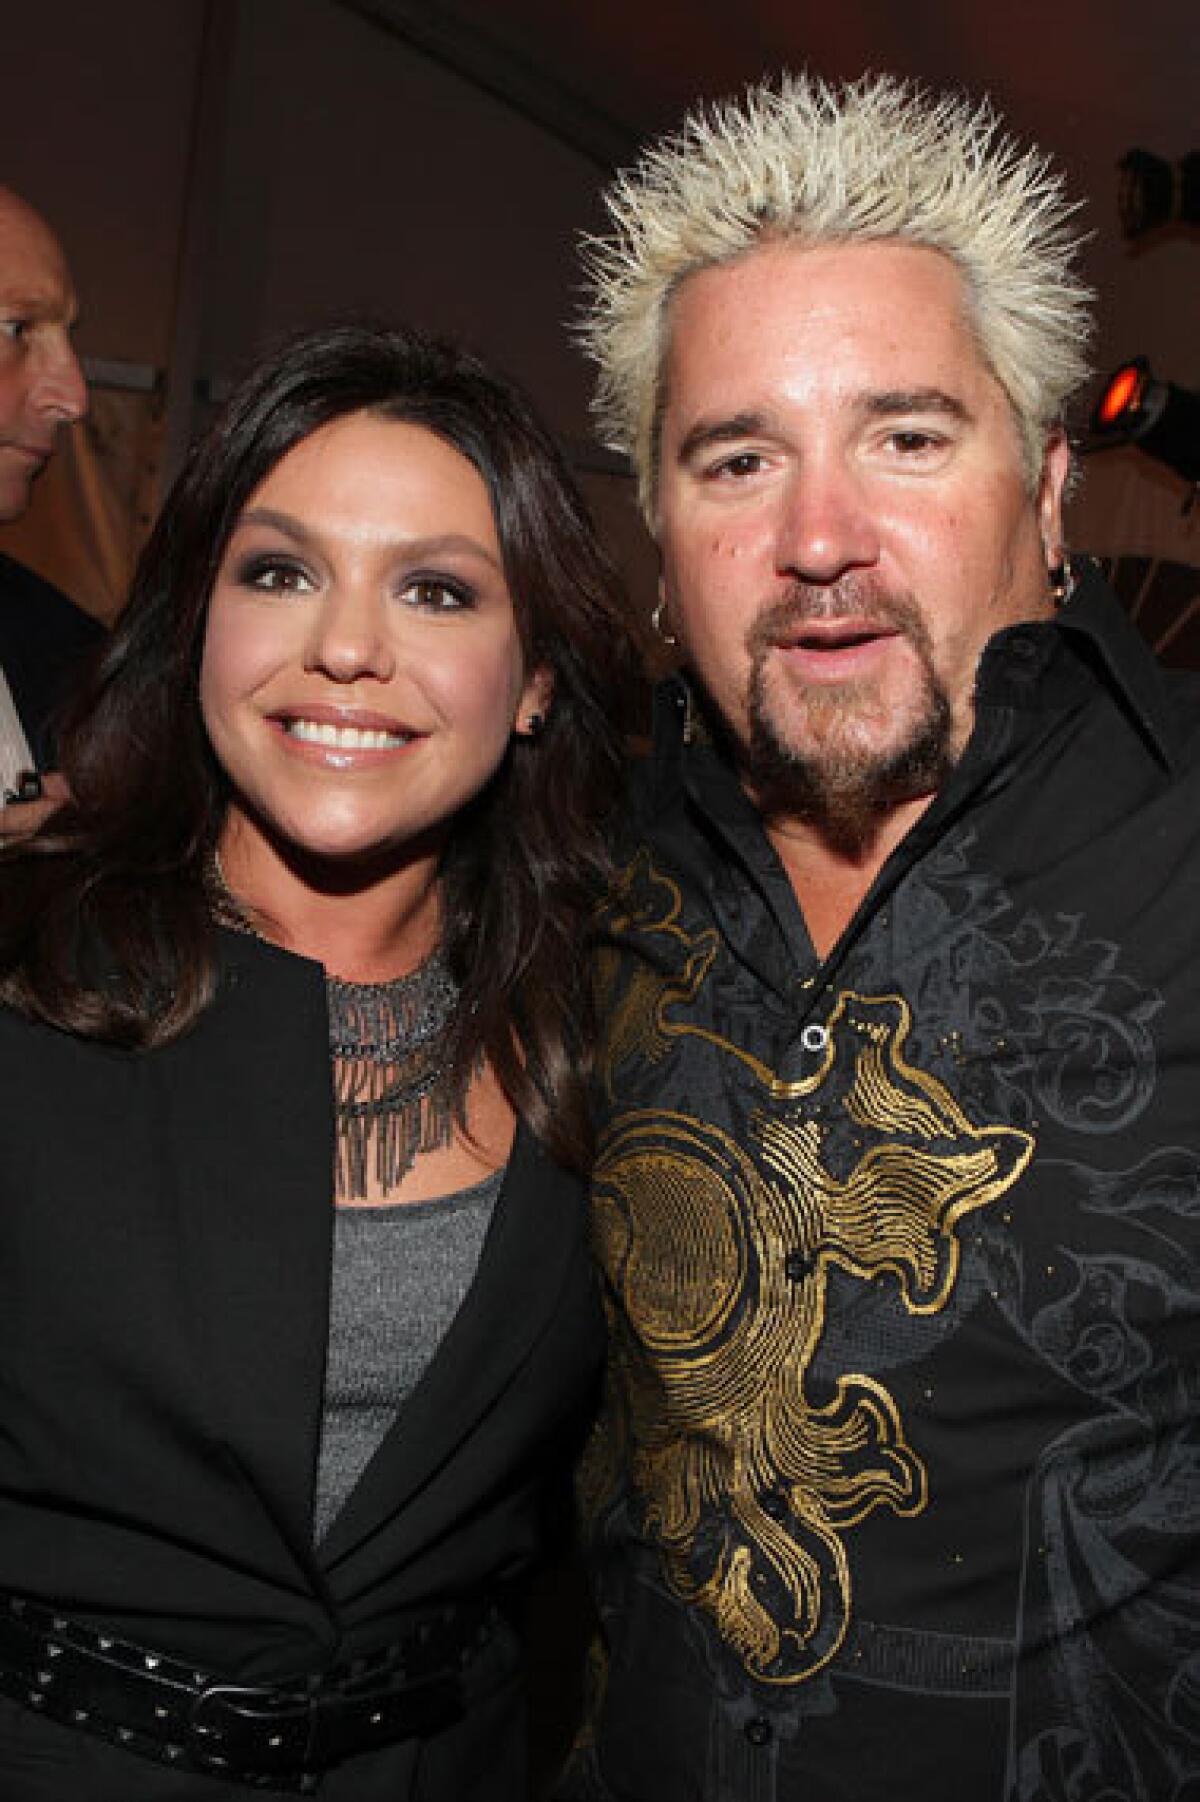 Hosts of "Rachael vs. Guy: Celebrity Cook-Off" Rachael Ray and Guy Fieri.